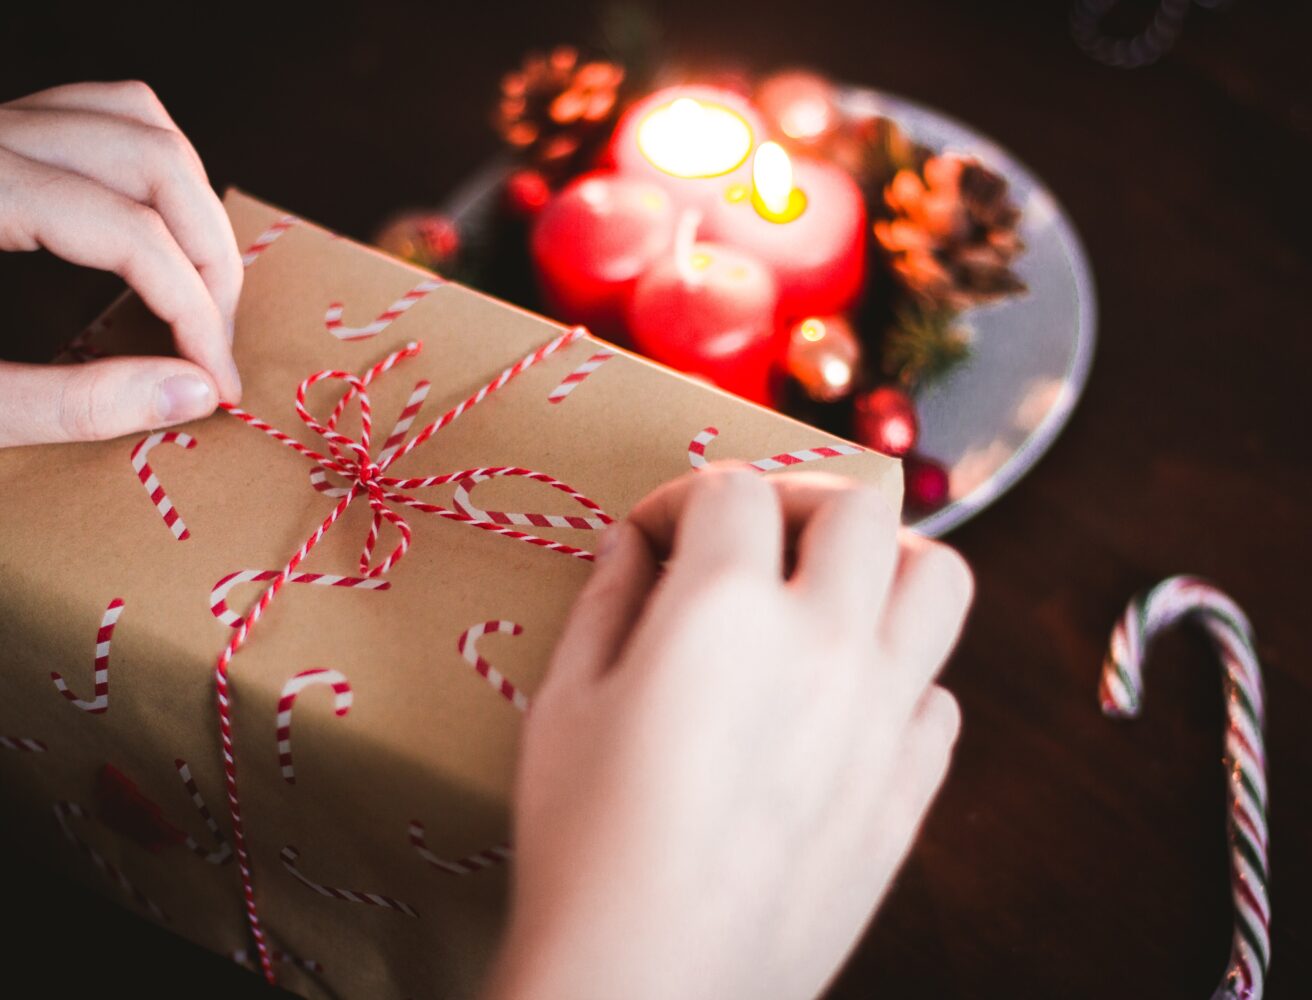 Close up view of a pair of hands unwrapping a gift